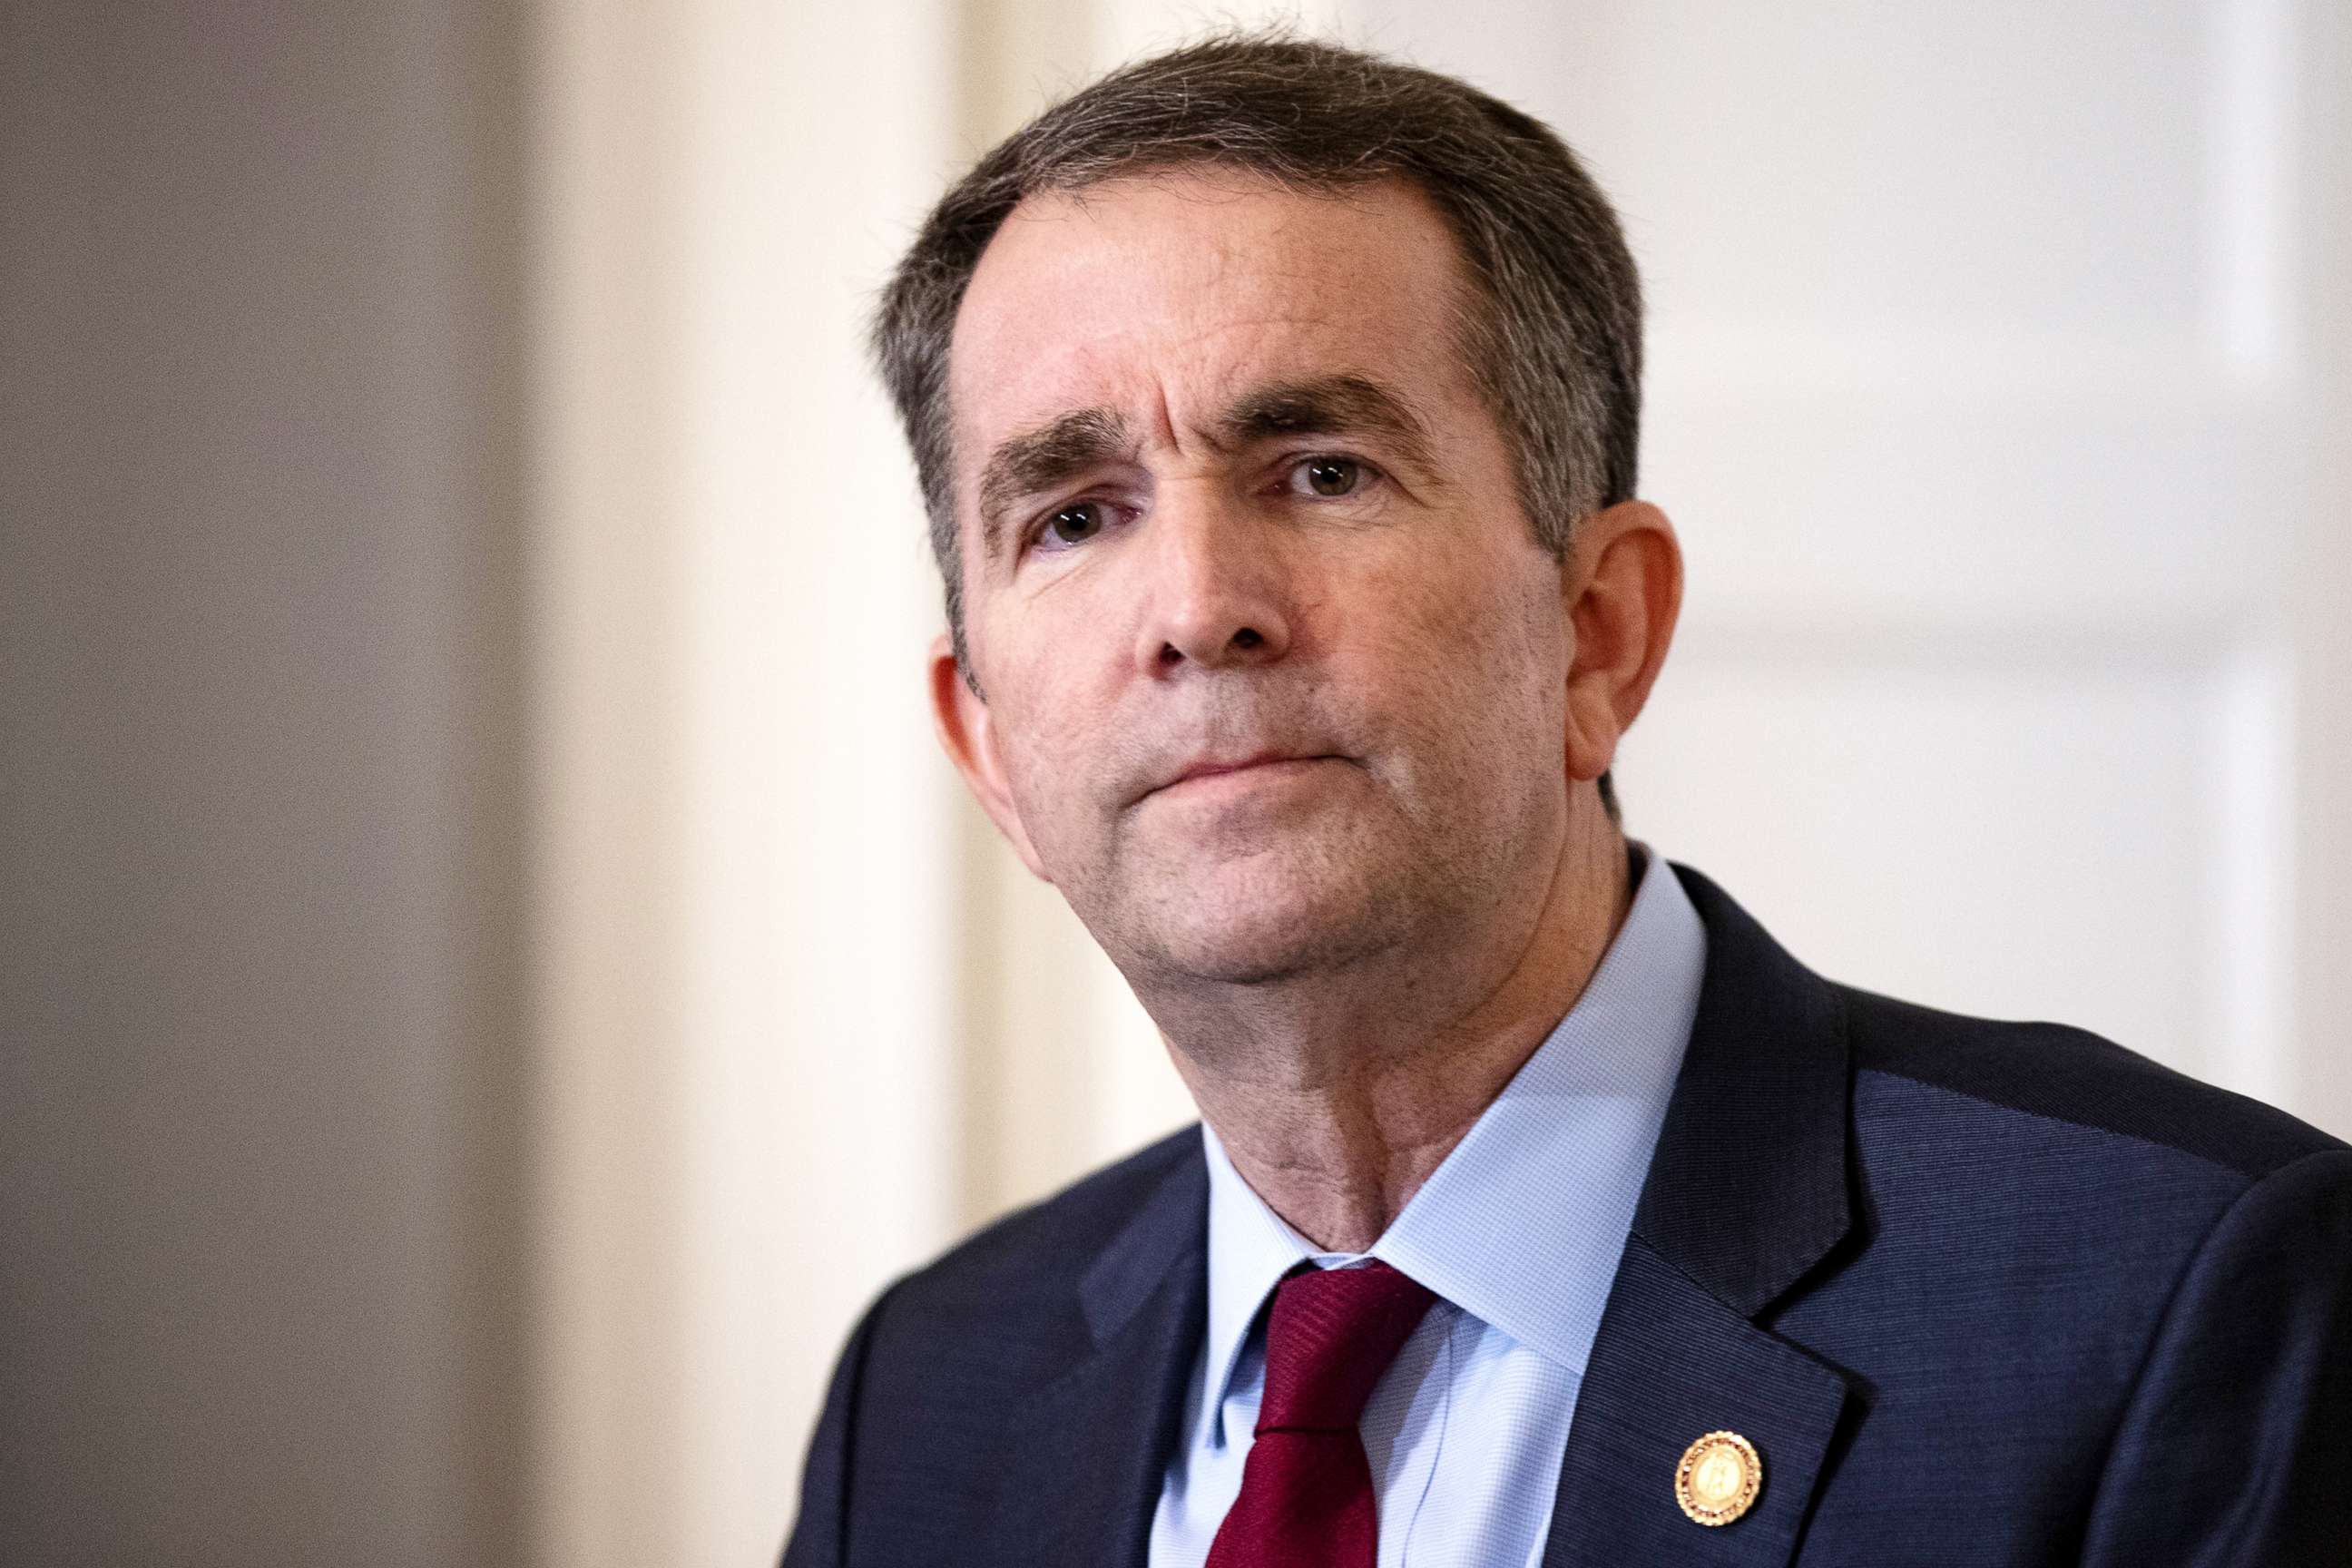 PHOTO: Virginia Governor Ralph Northam speaks with reporters at a press conference at the Governor's mansion on Feb. 2, 2019, in Richmond, Va.